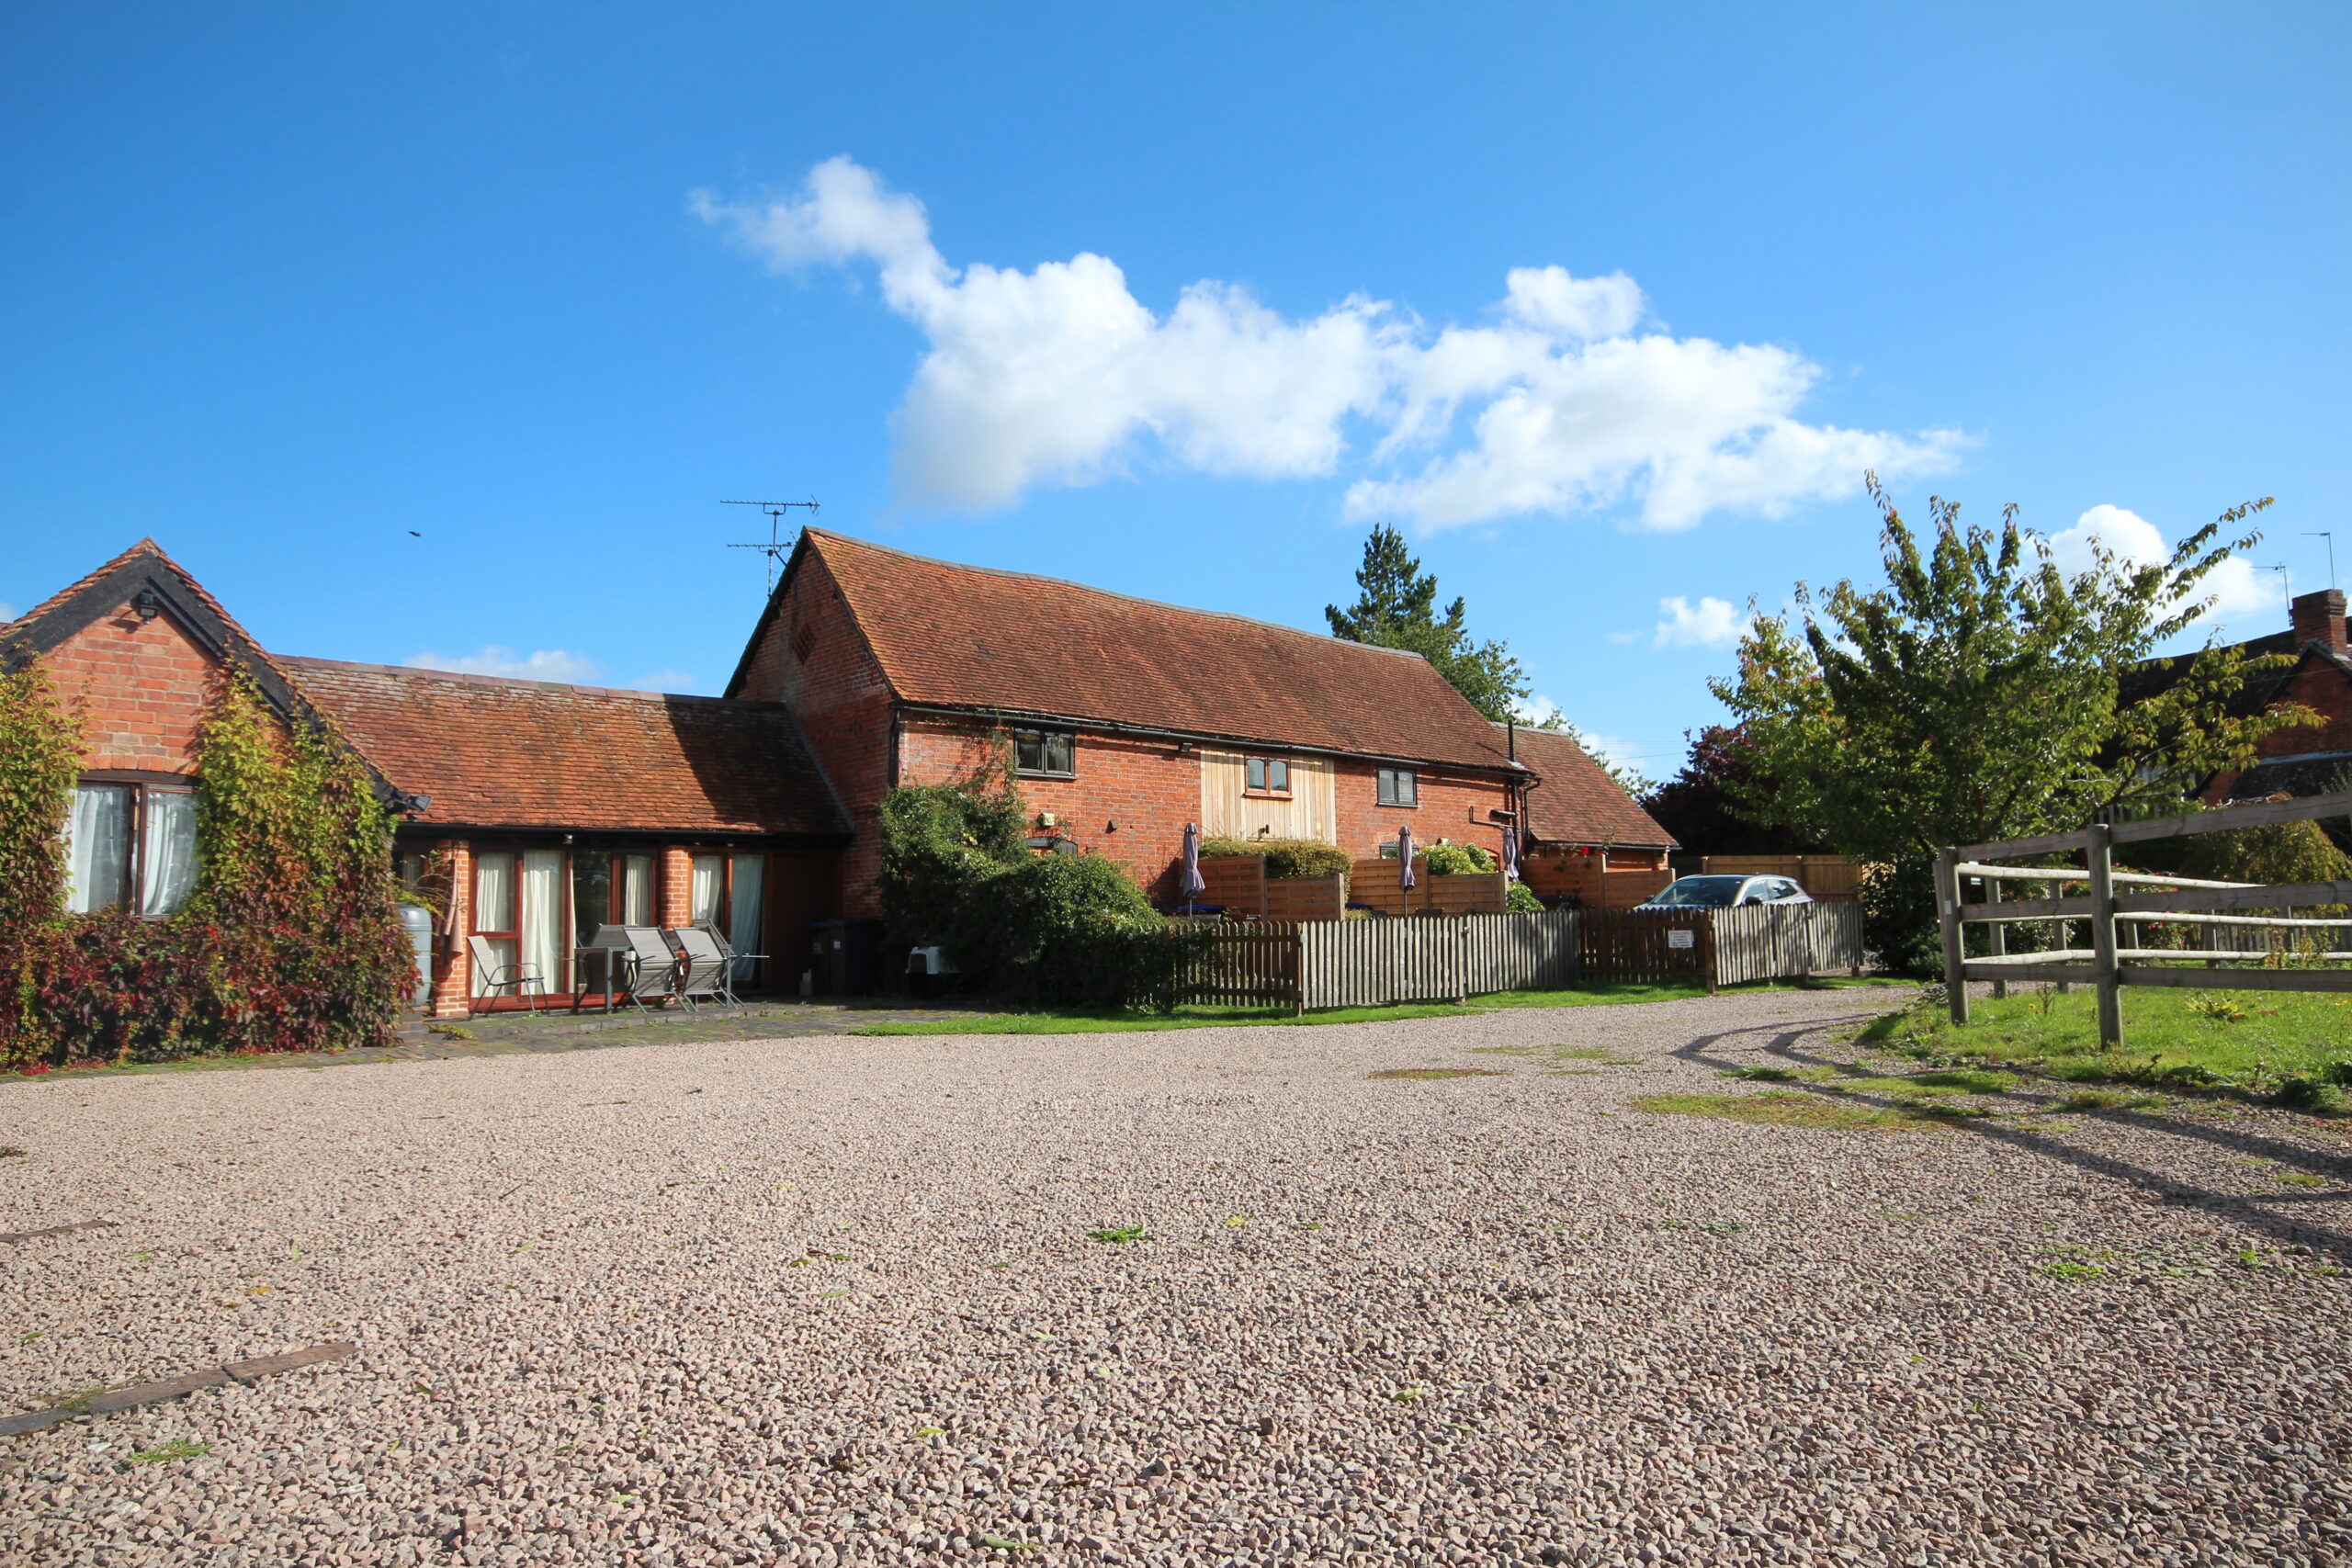 Whitley Elm Self Catering Holiday Cottages